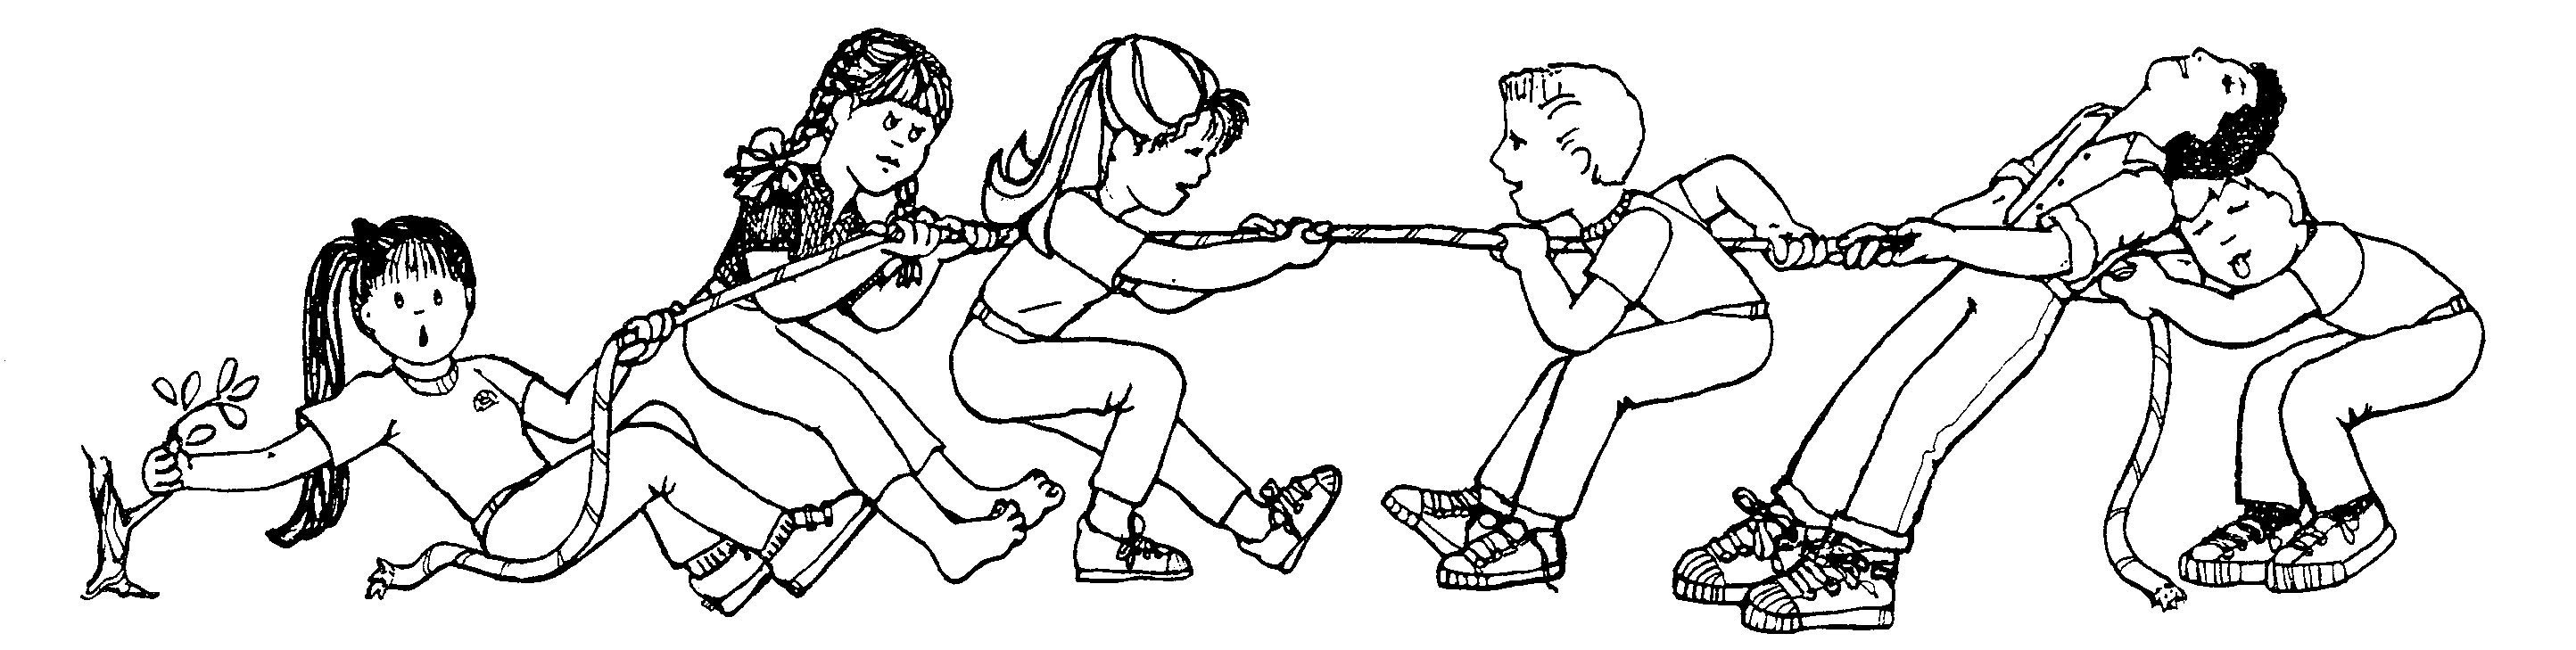 Tug Of War PNG Black And White - 82606